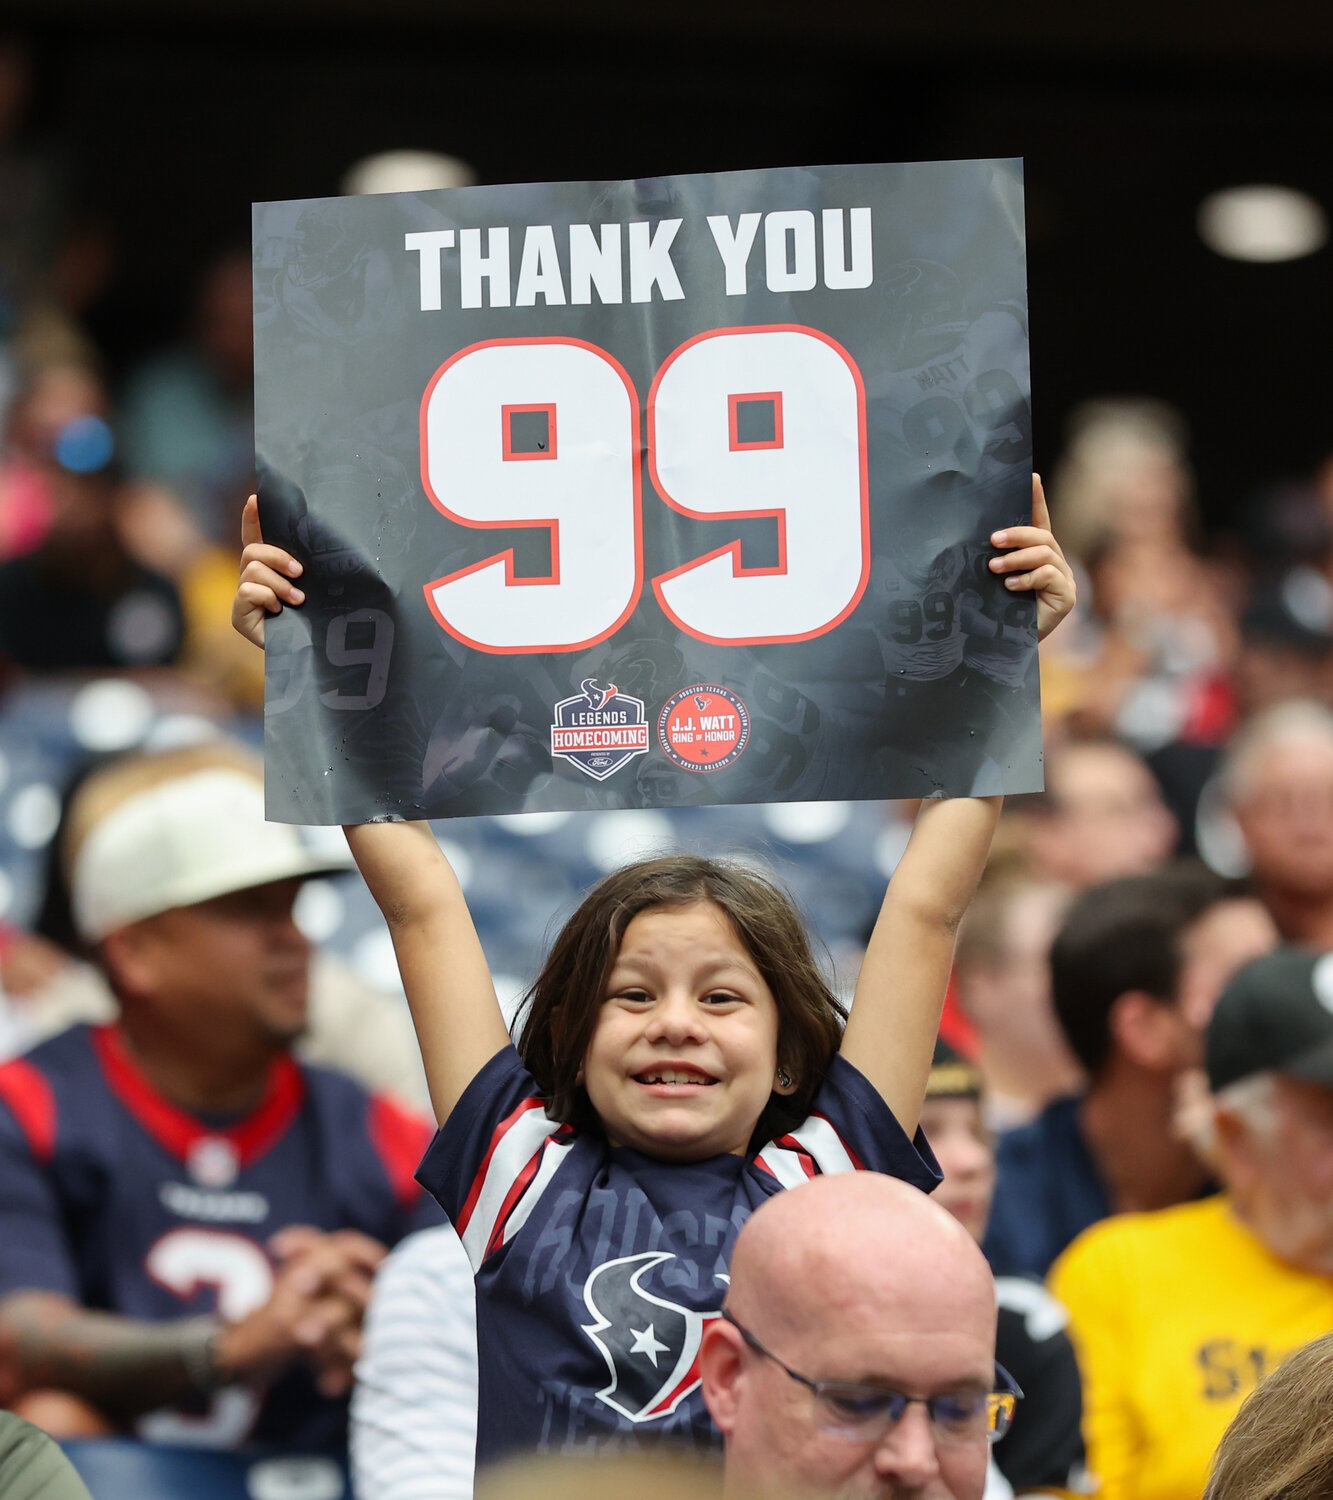 A young Houston fan holds up a sign for former Texans player JJ Watt during an NFL game between the Texans and the Steelers on October 1, 2023 in Houston. Watt was inducted into the Texans’ Ring of Honor at halftime.